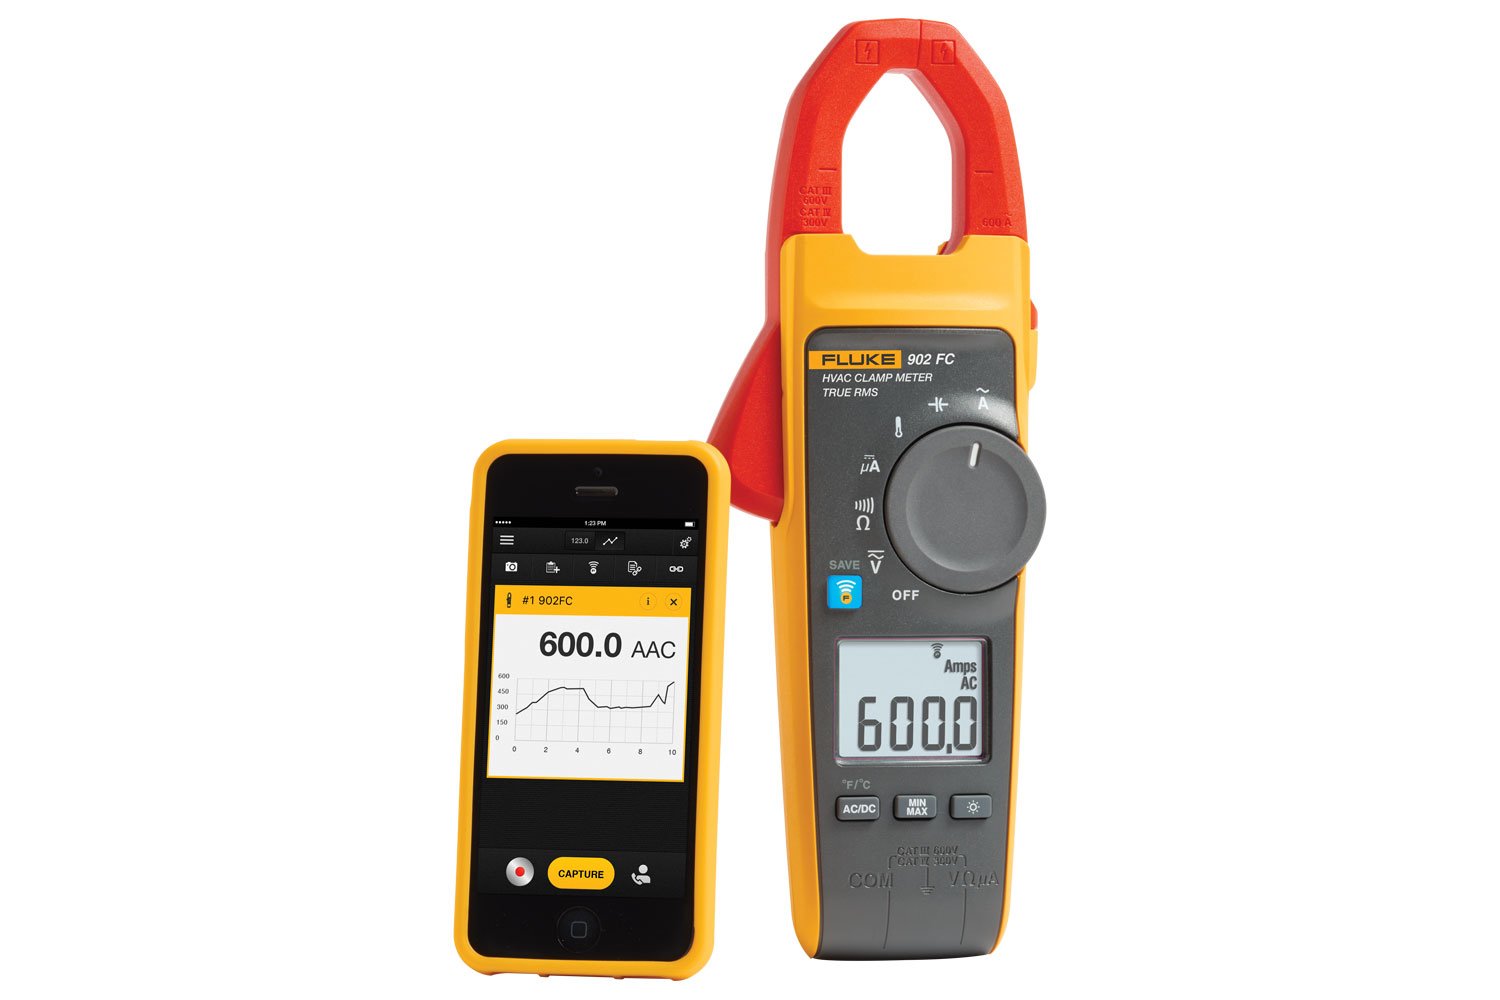 LHQ-HQ Portable Scientific Super Large Caliber 0-3200A AC Leakage Current Clamp Meter with Digital clamp Ammeter RS232 Interface 99 Data Logger ETCR7100 